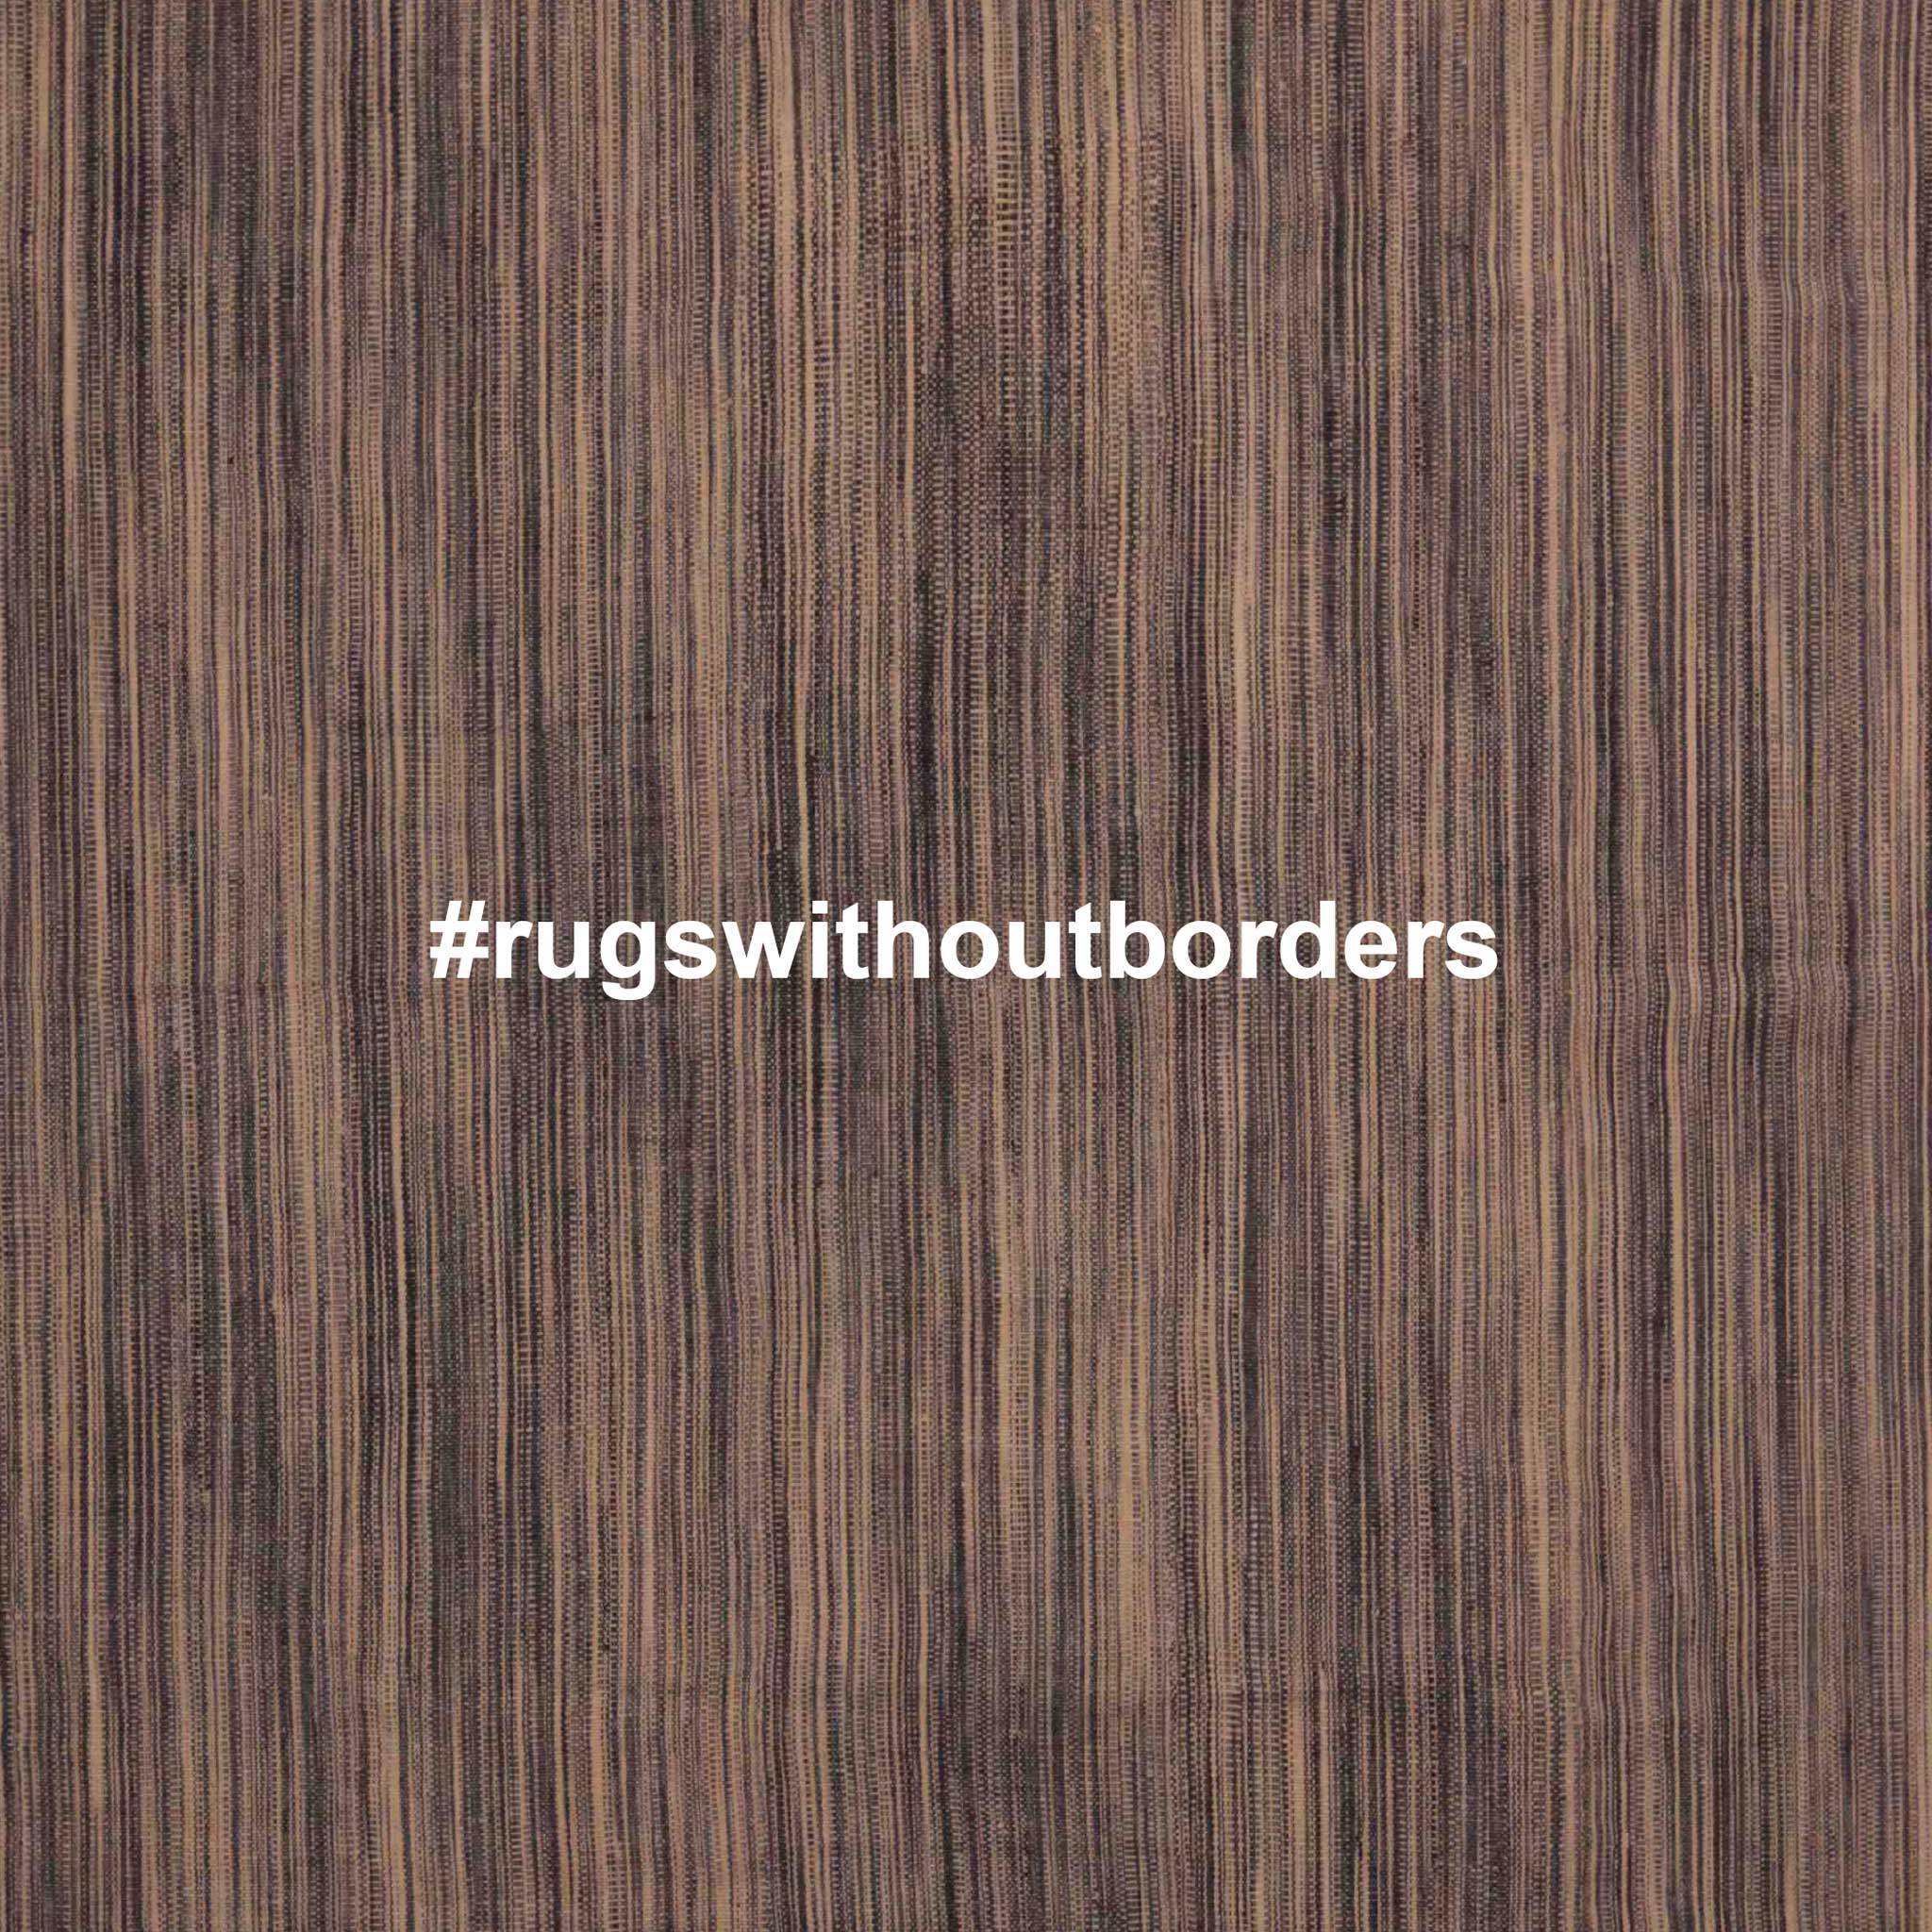 #rugswithoutborders - A social media campaign to raise awareness of the interconnected nature of our world. | Rug image: Edelgrund's Massal Collection. Image courtesy of Edelgrund.